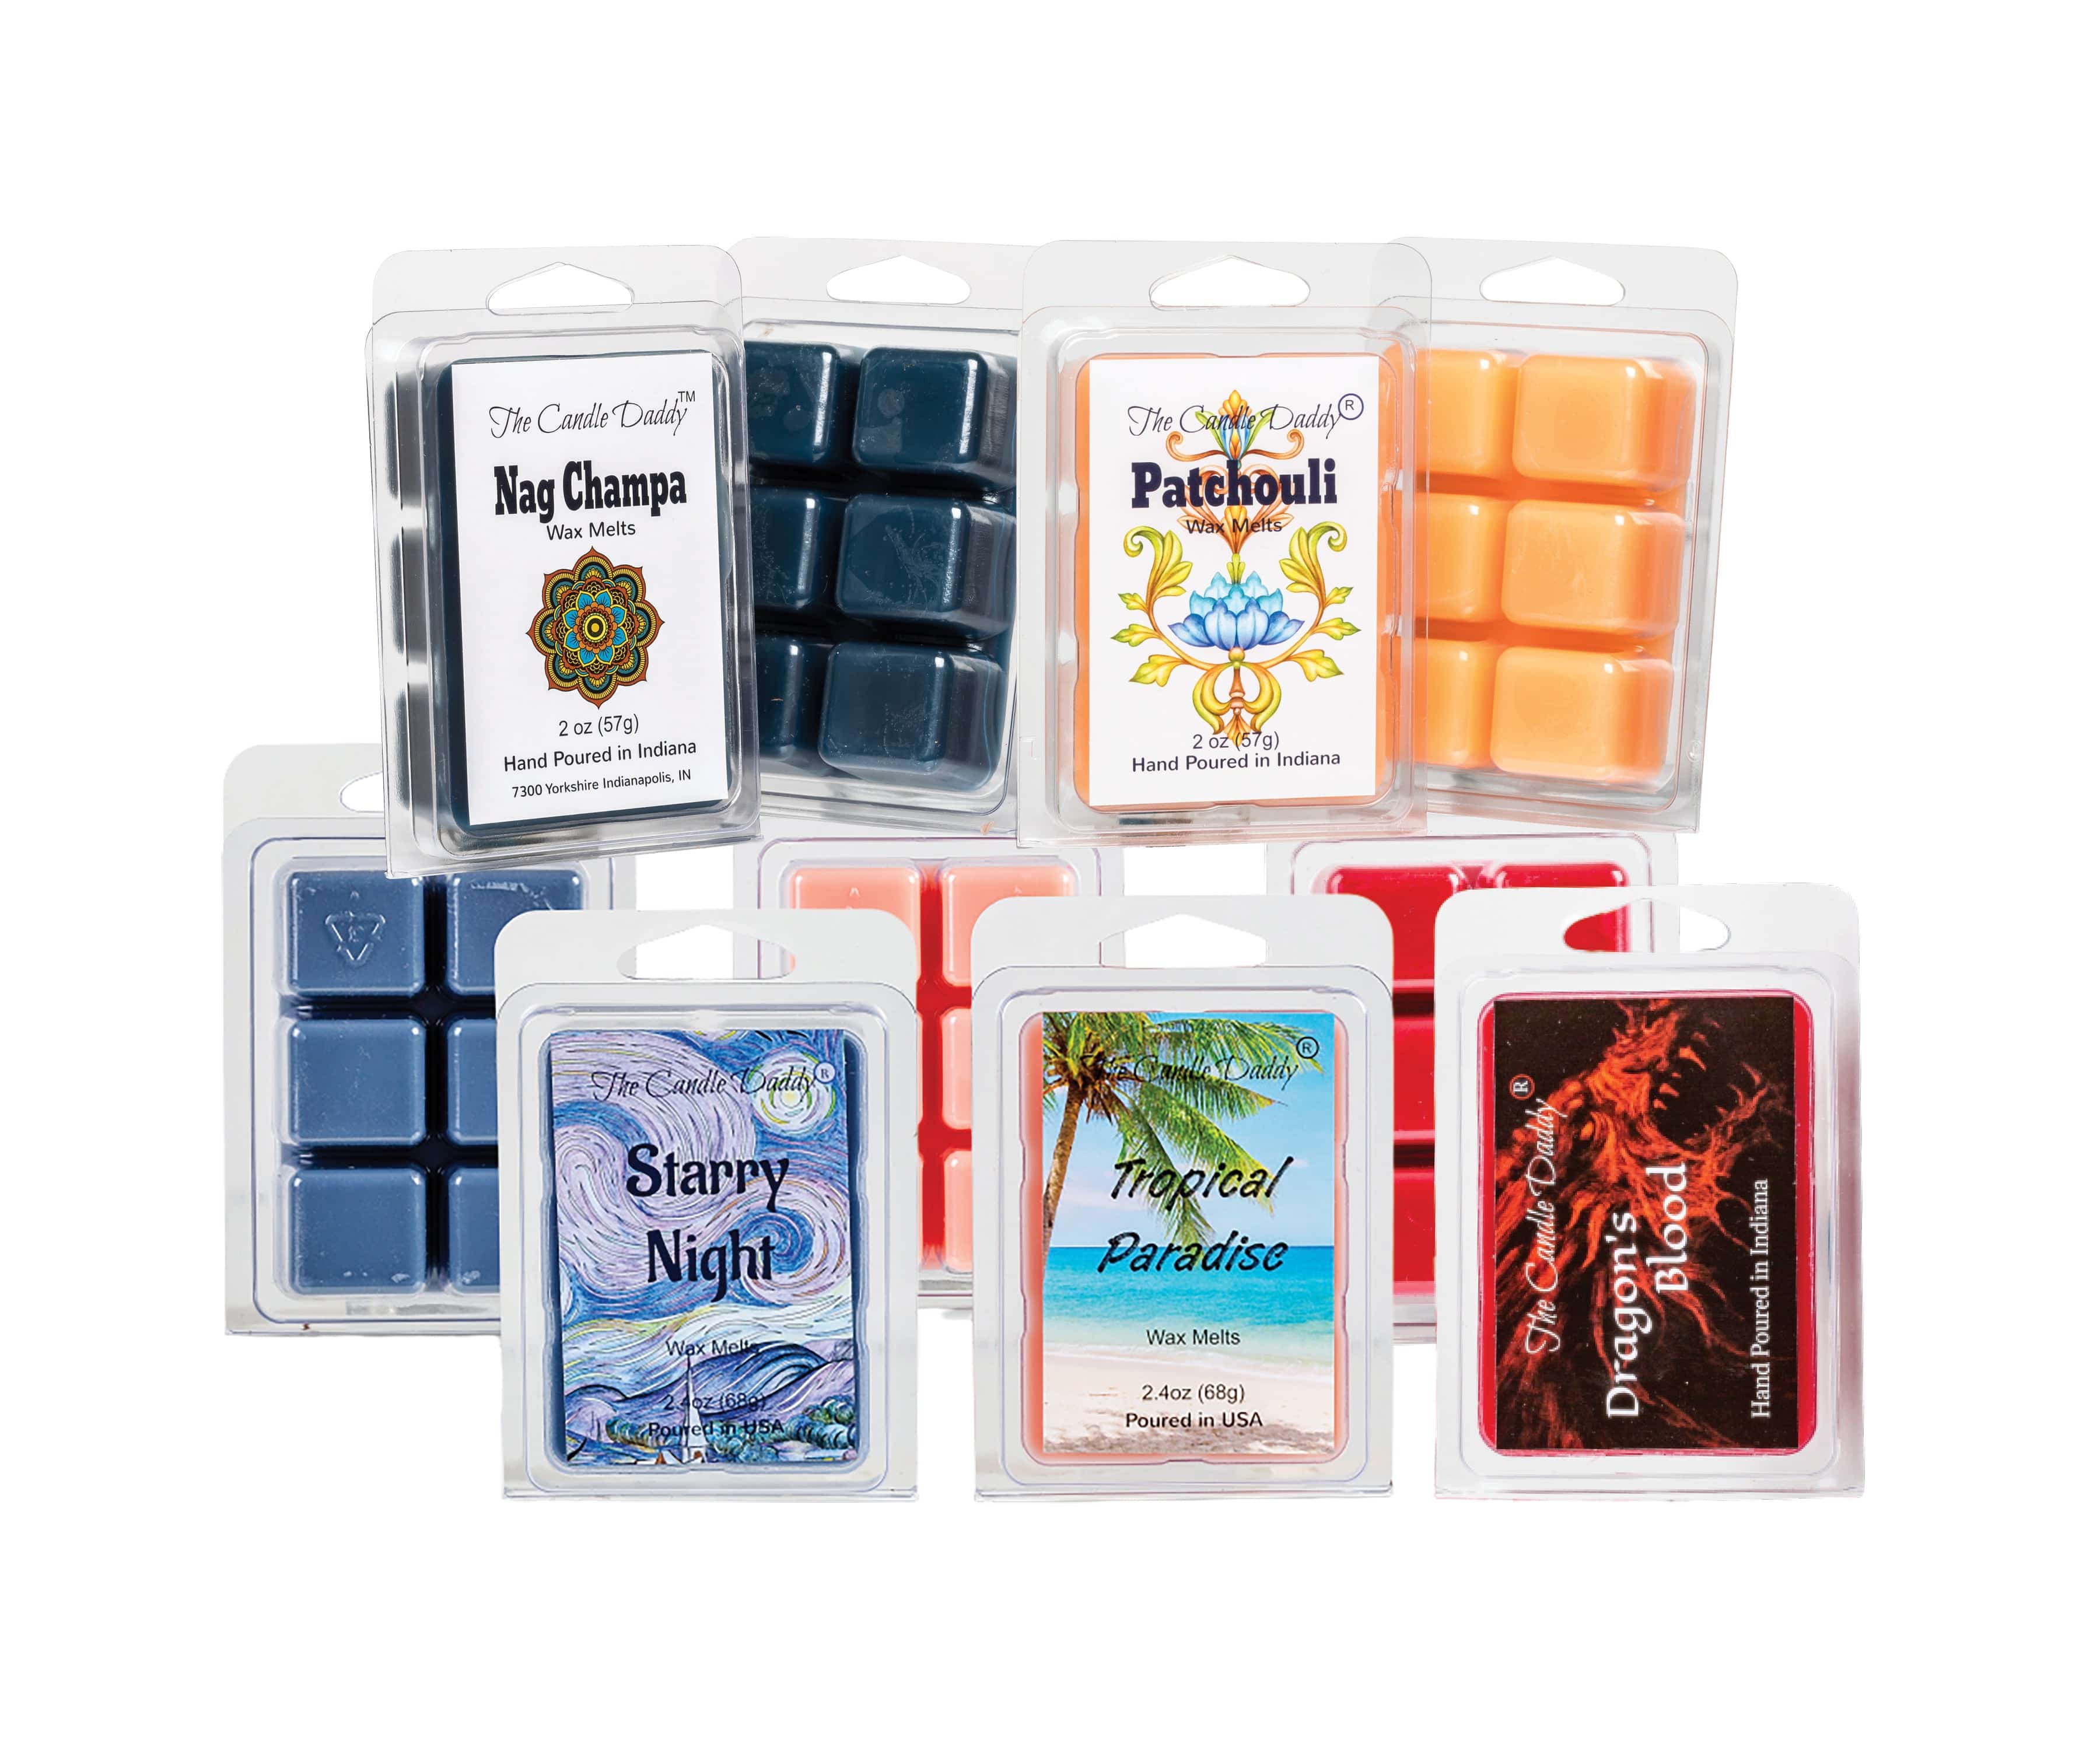 Candle Warmers Soy Wax Melts, Escape To Paradise, Pineapple/Peach/Guava 2.5  Oz